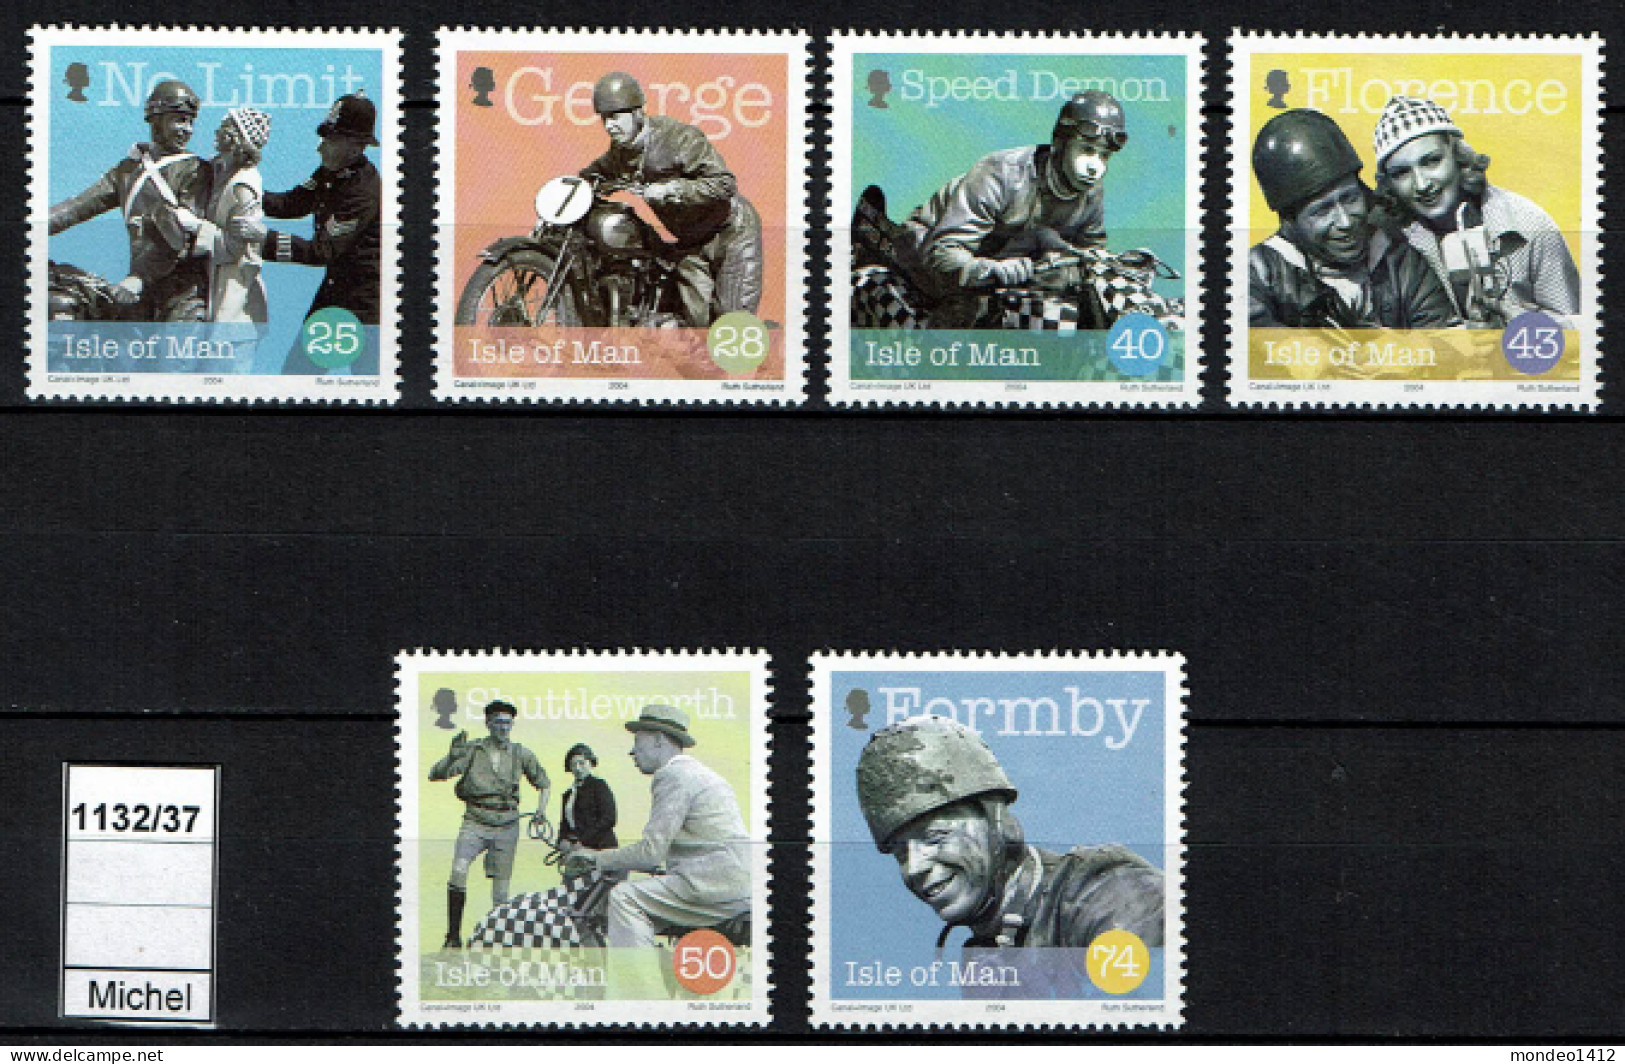 Isle Of Man - 2004 - MNH - Cinéma, Motorcycle, George Formby - English Actor, Singer-songwriter And Comedian - Man (Ile De)